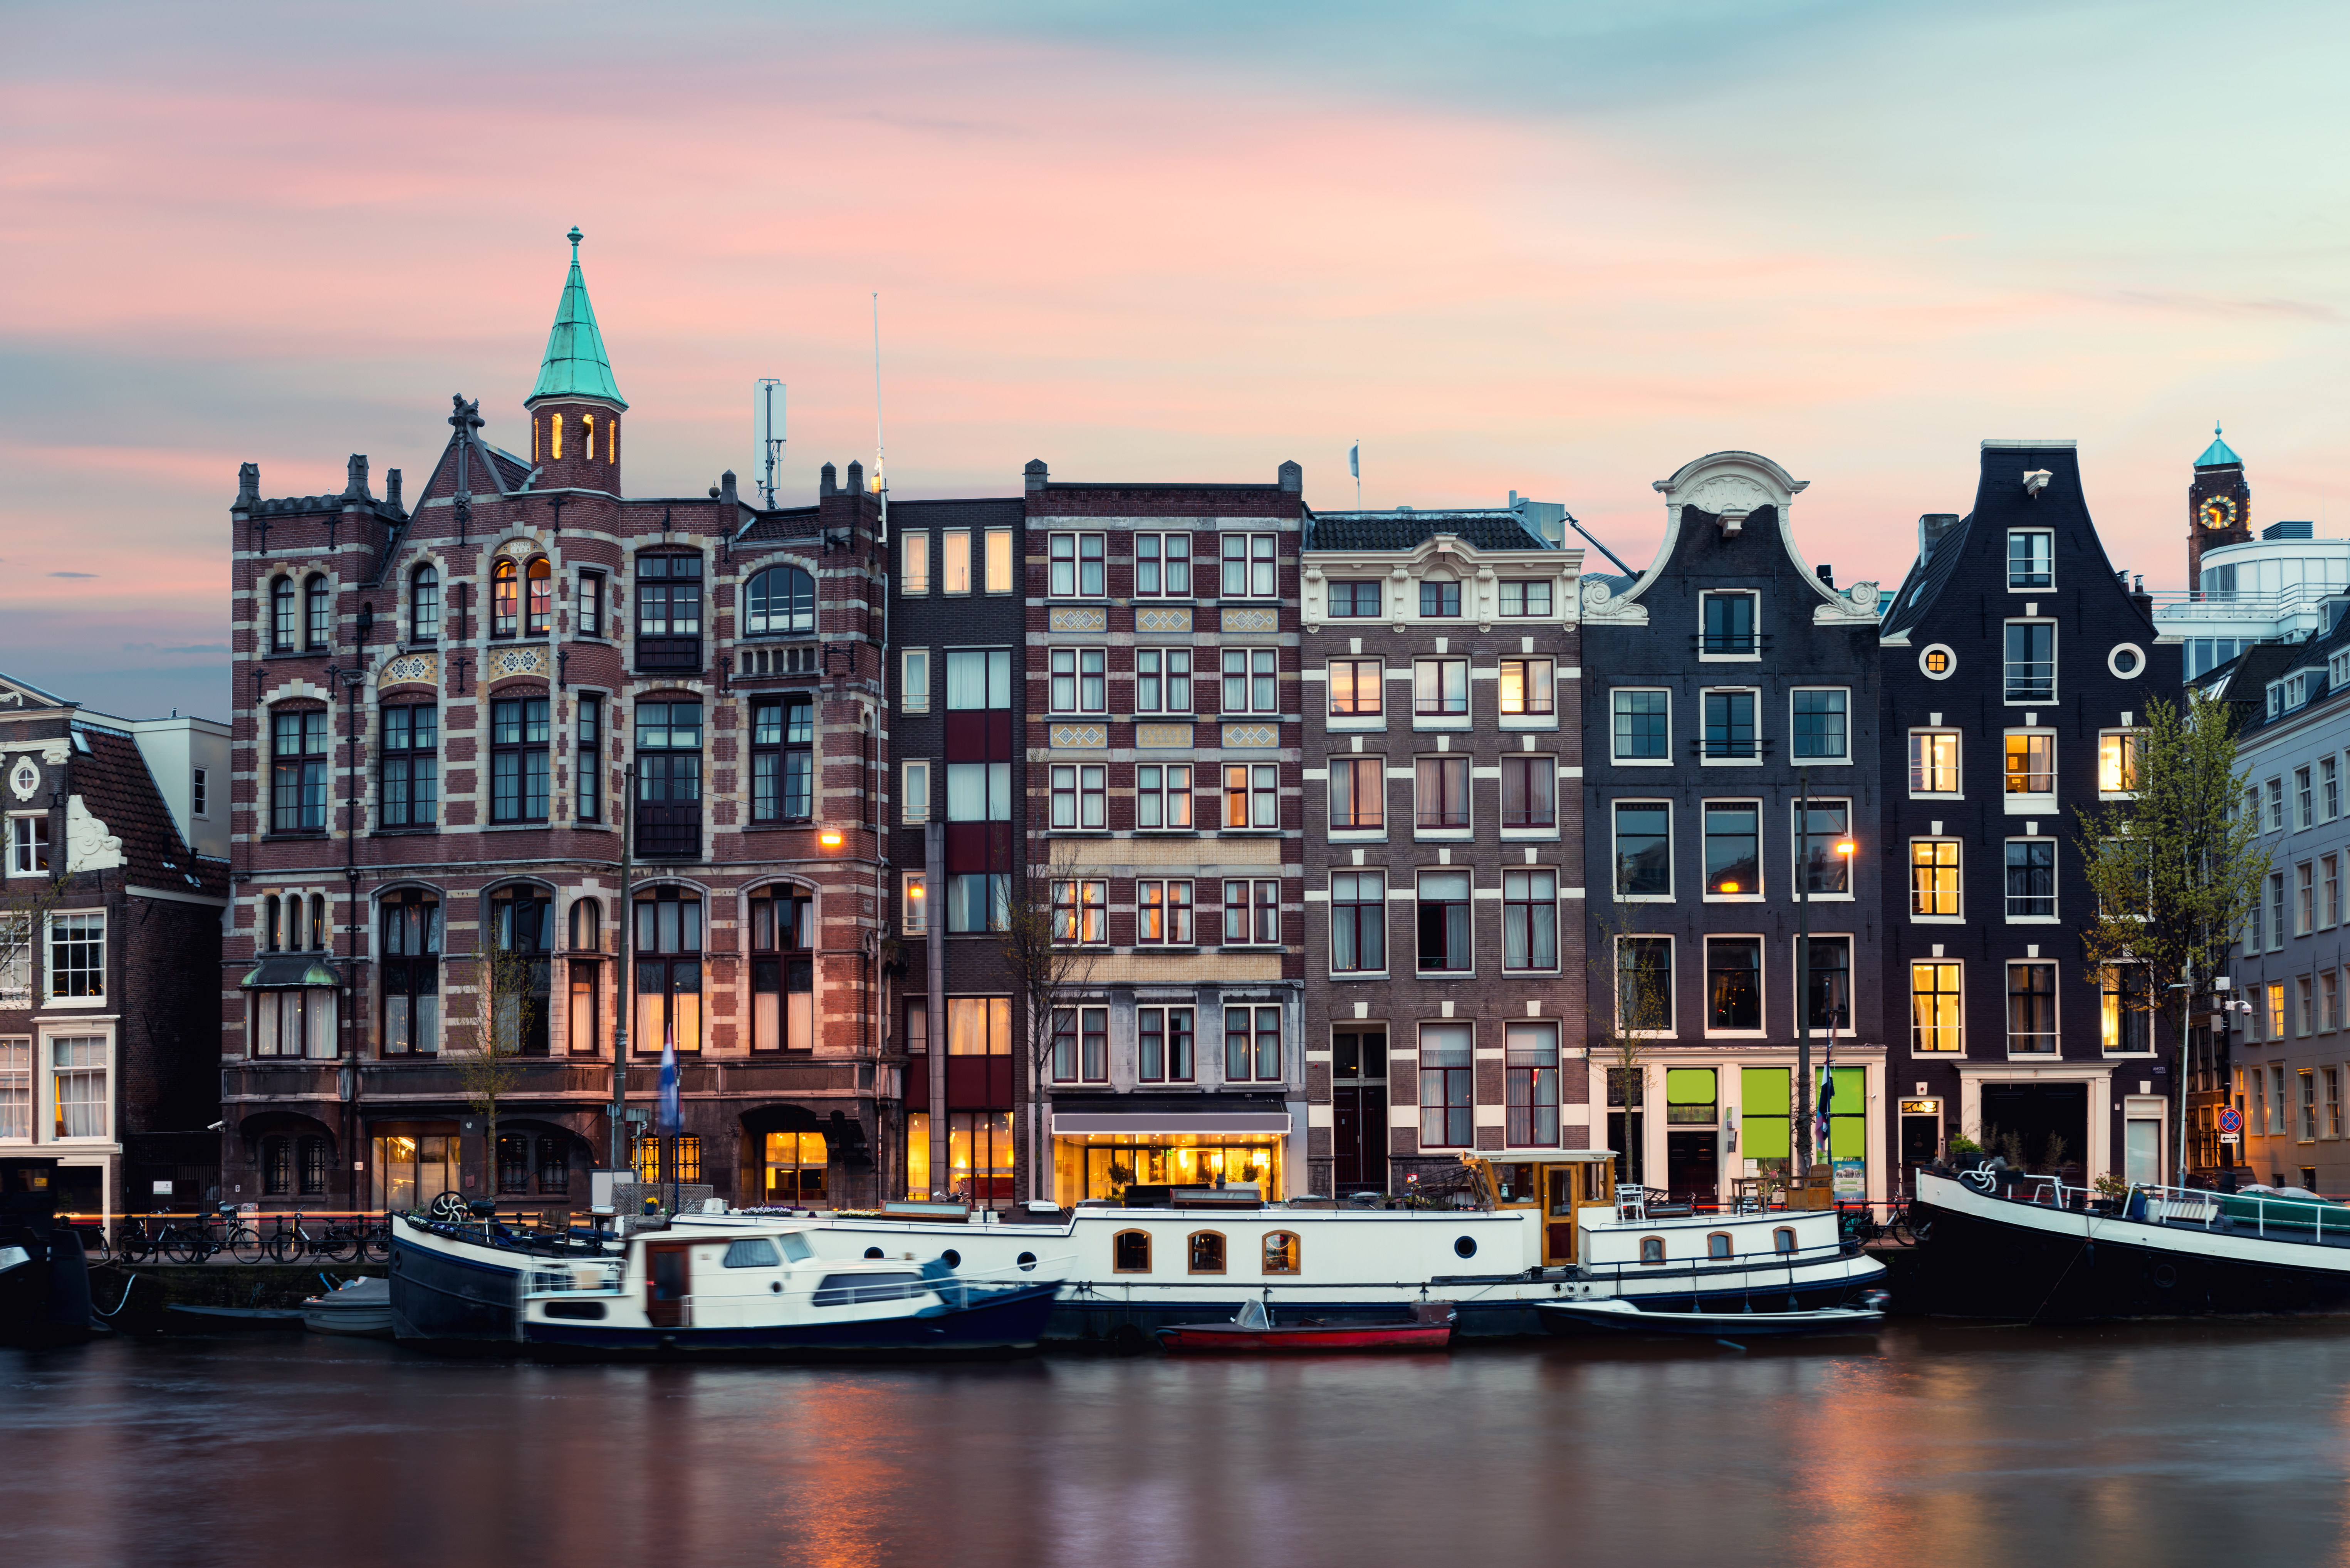 Night Amsterdam city view of Netherlands traditional houses with